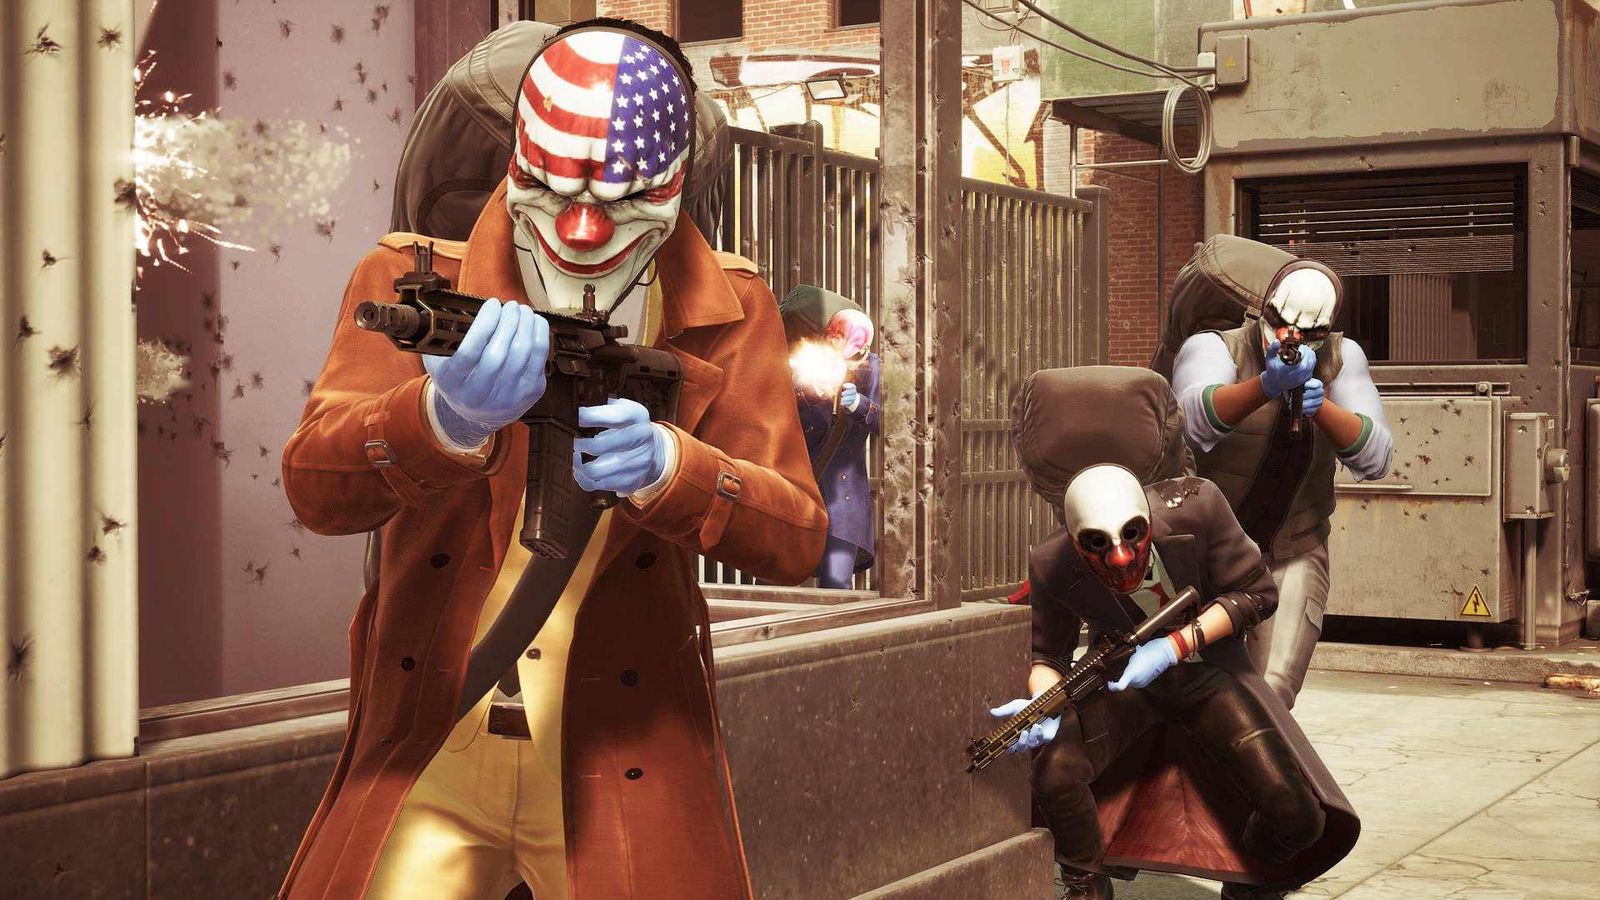 Payday 3 characters - picture of Payday 3 heisters in a gunfight